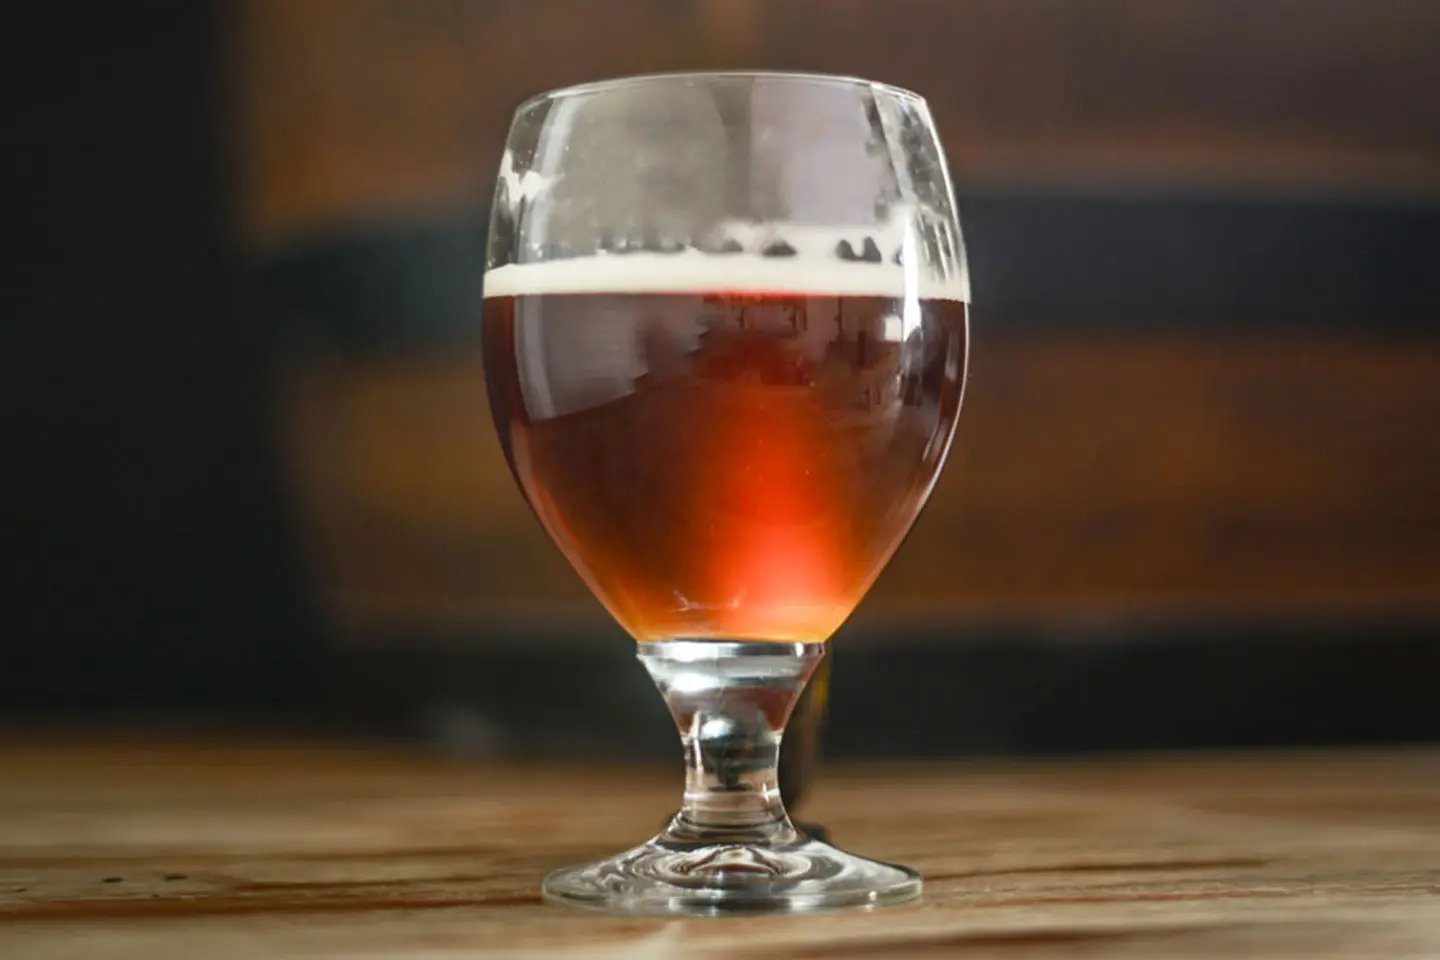 smoked ale recipe - What ingredients do you need to make ale